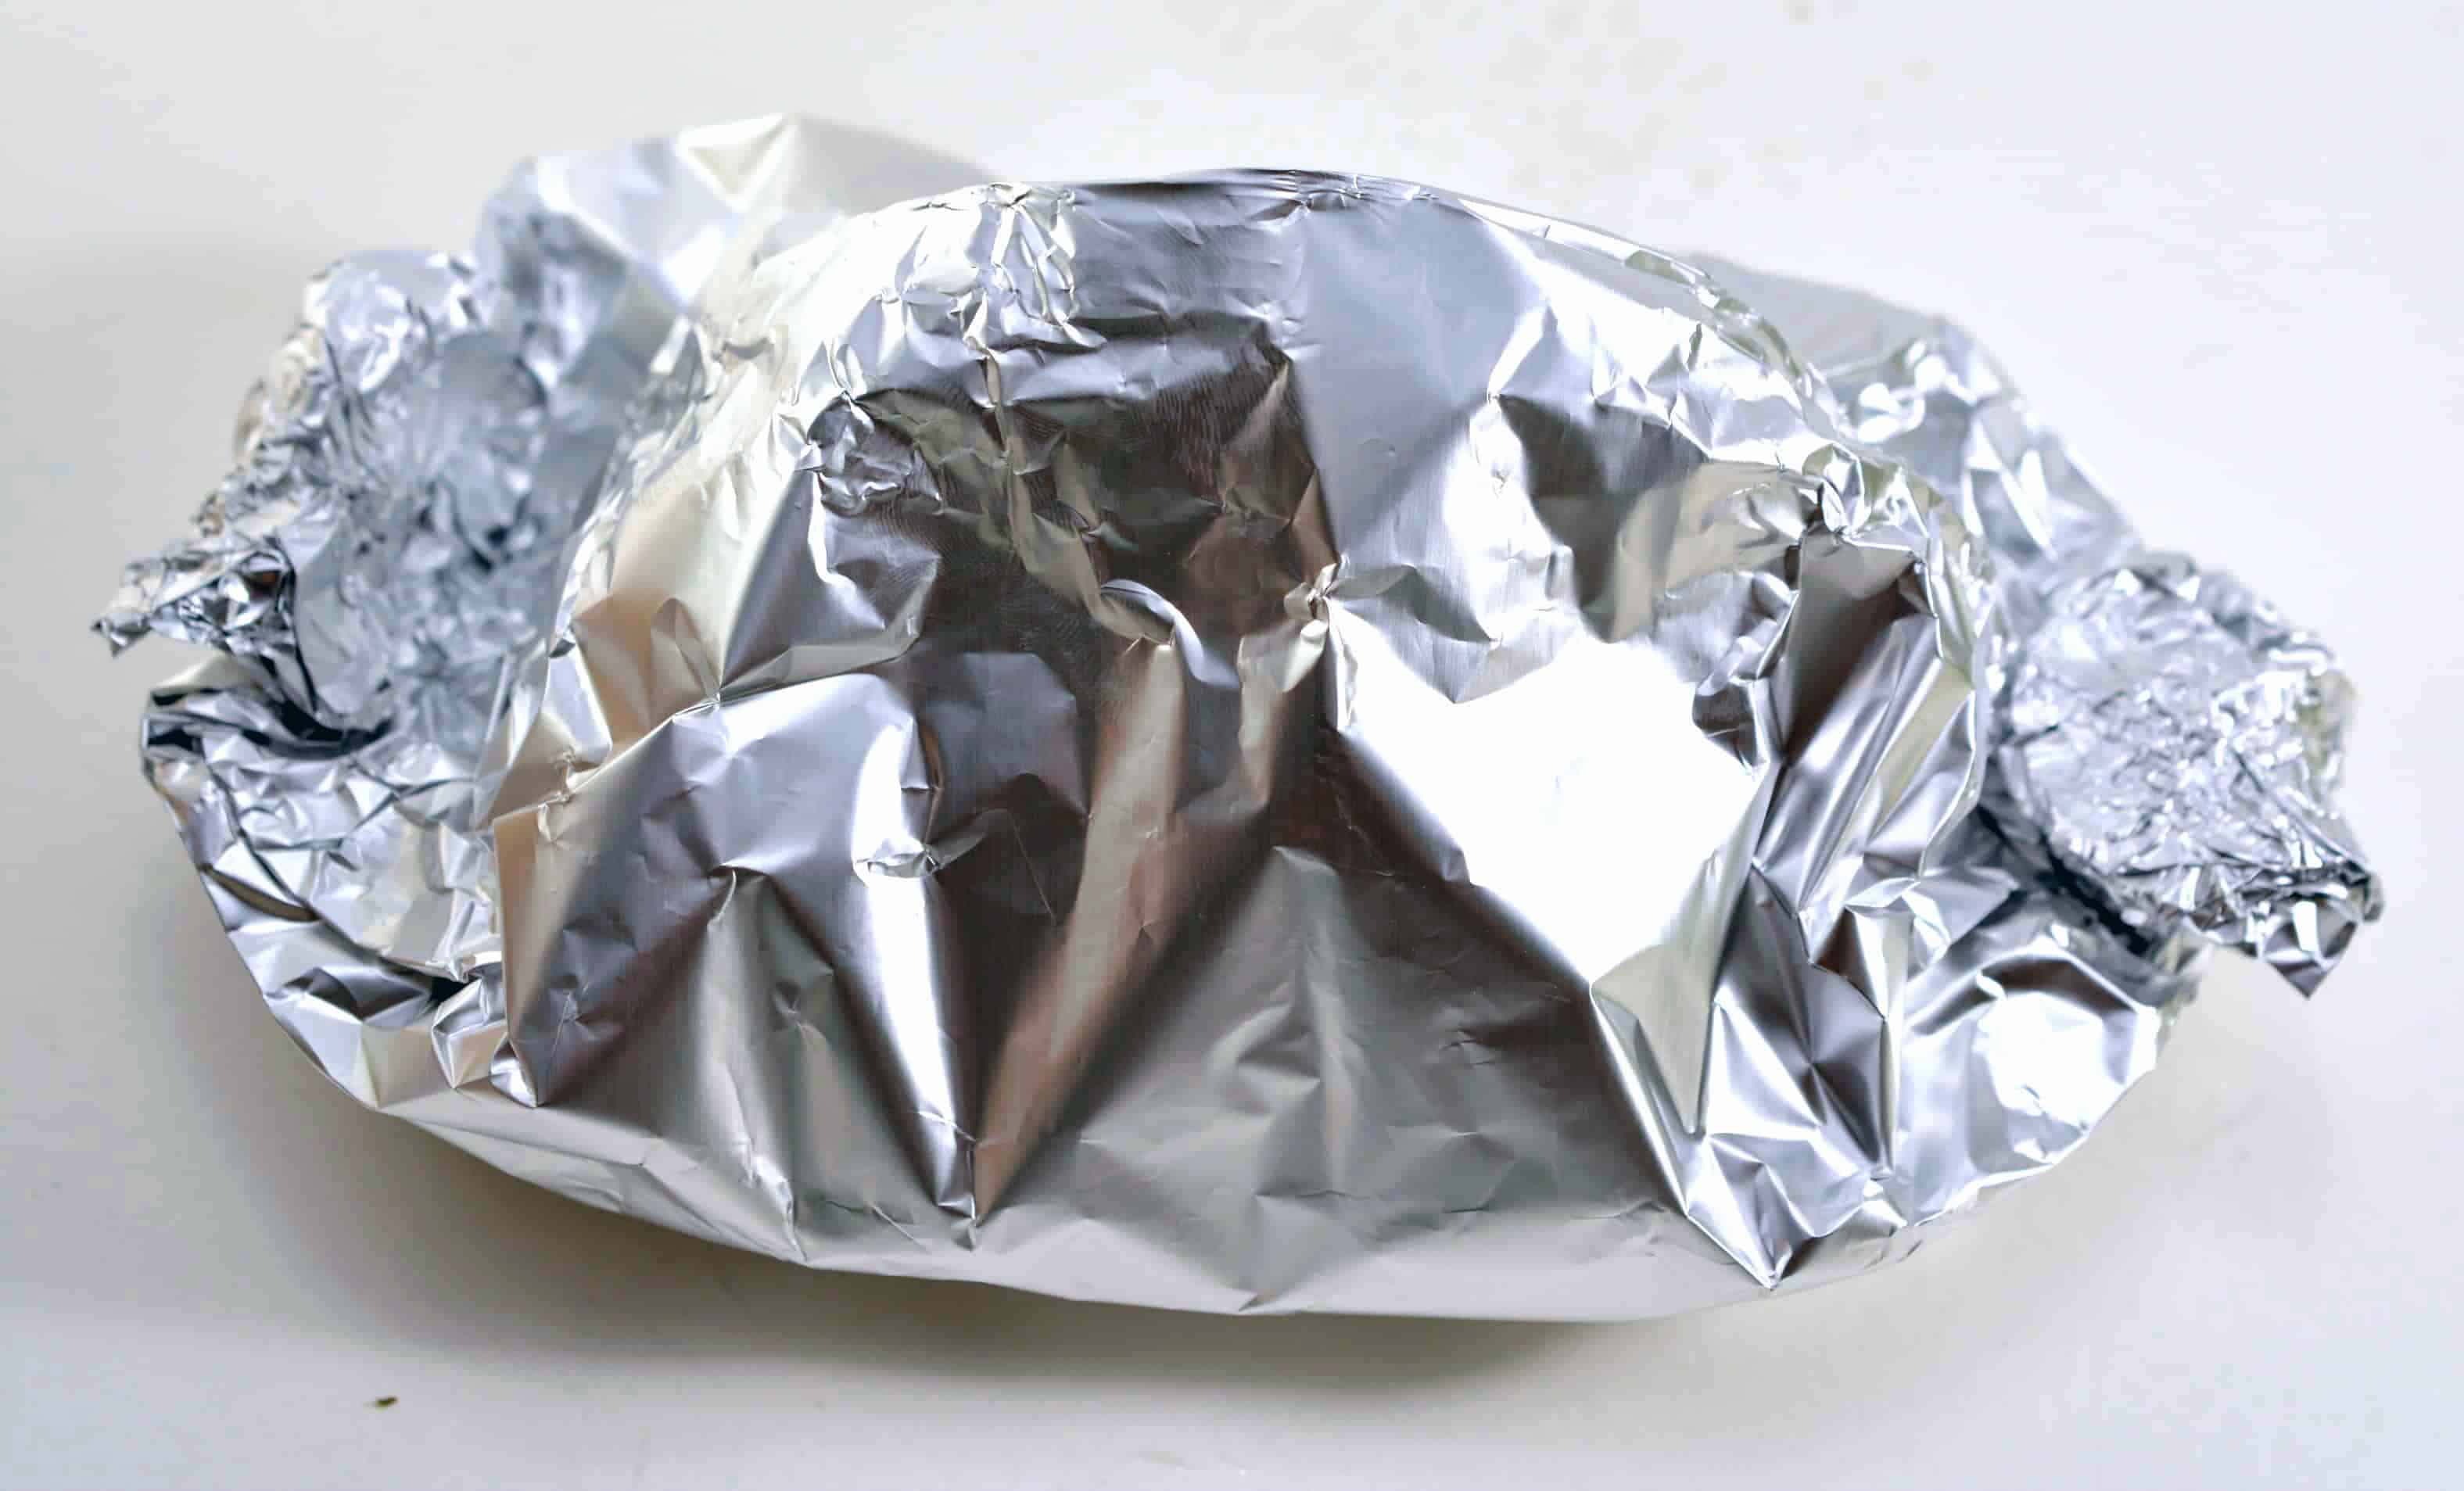 wrapped food in aluminum foil